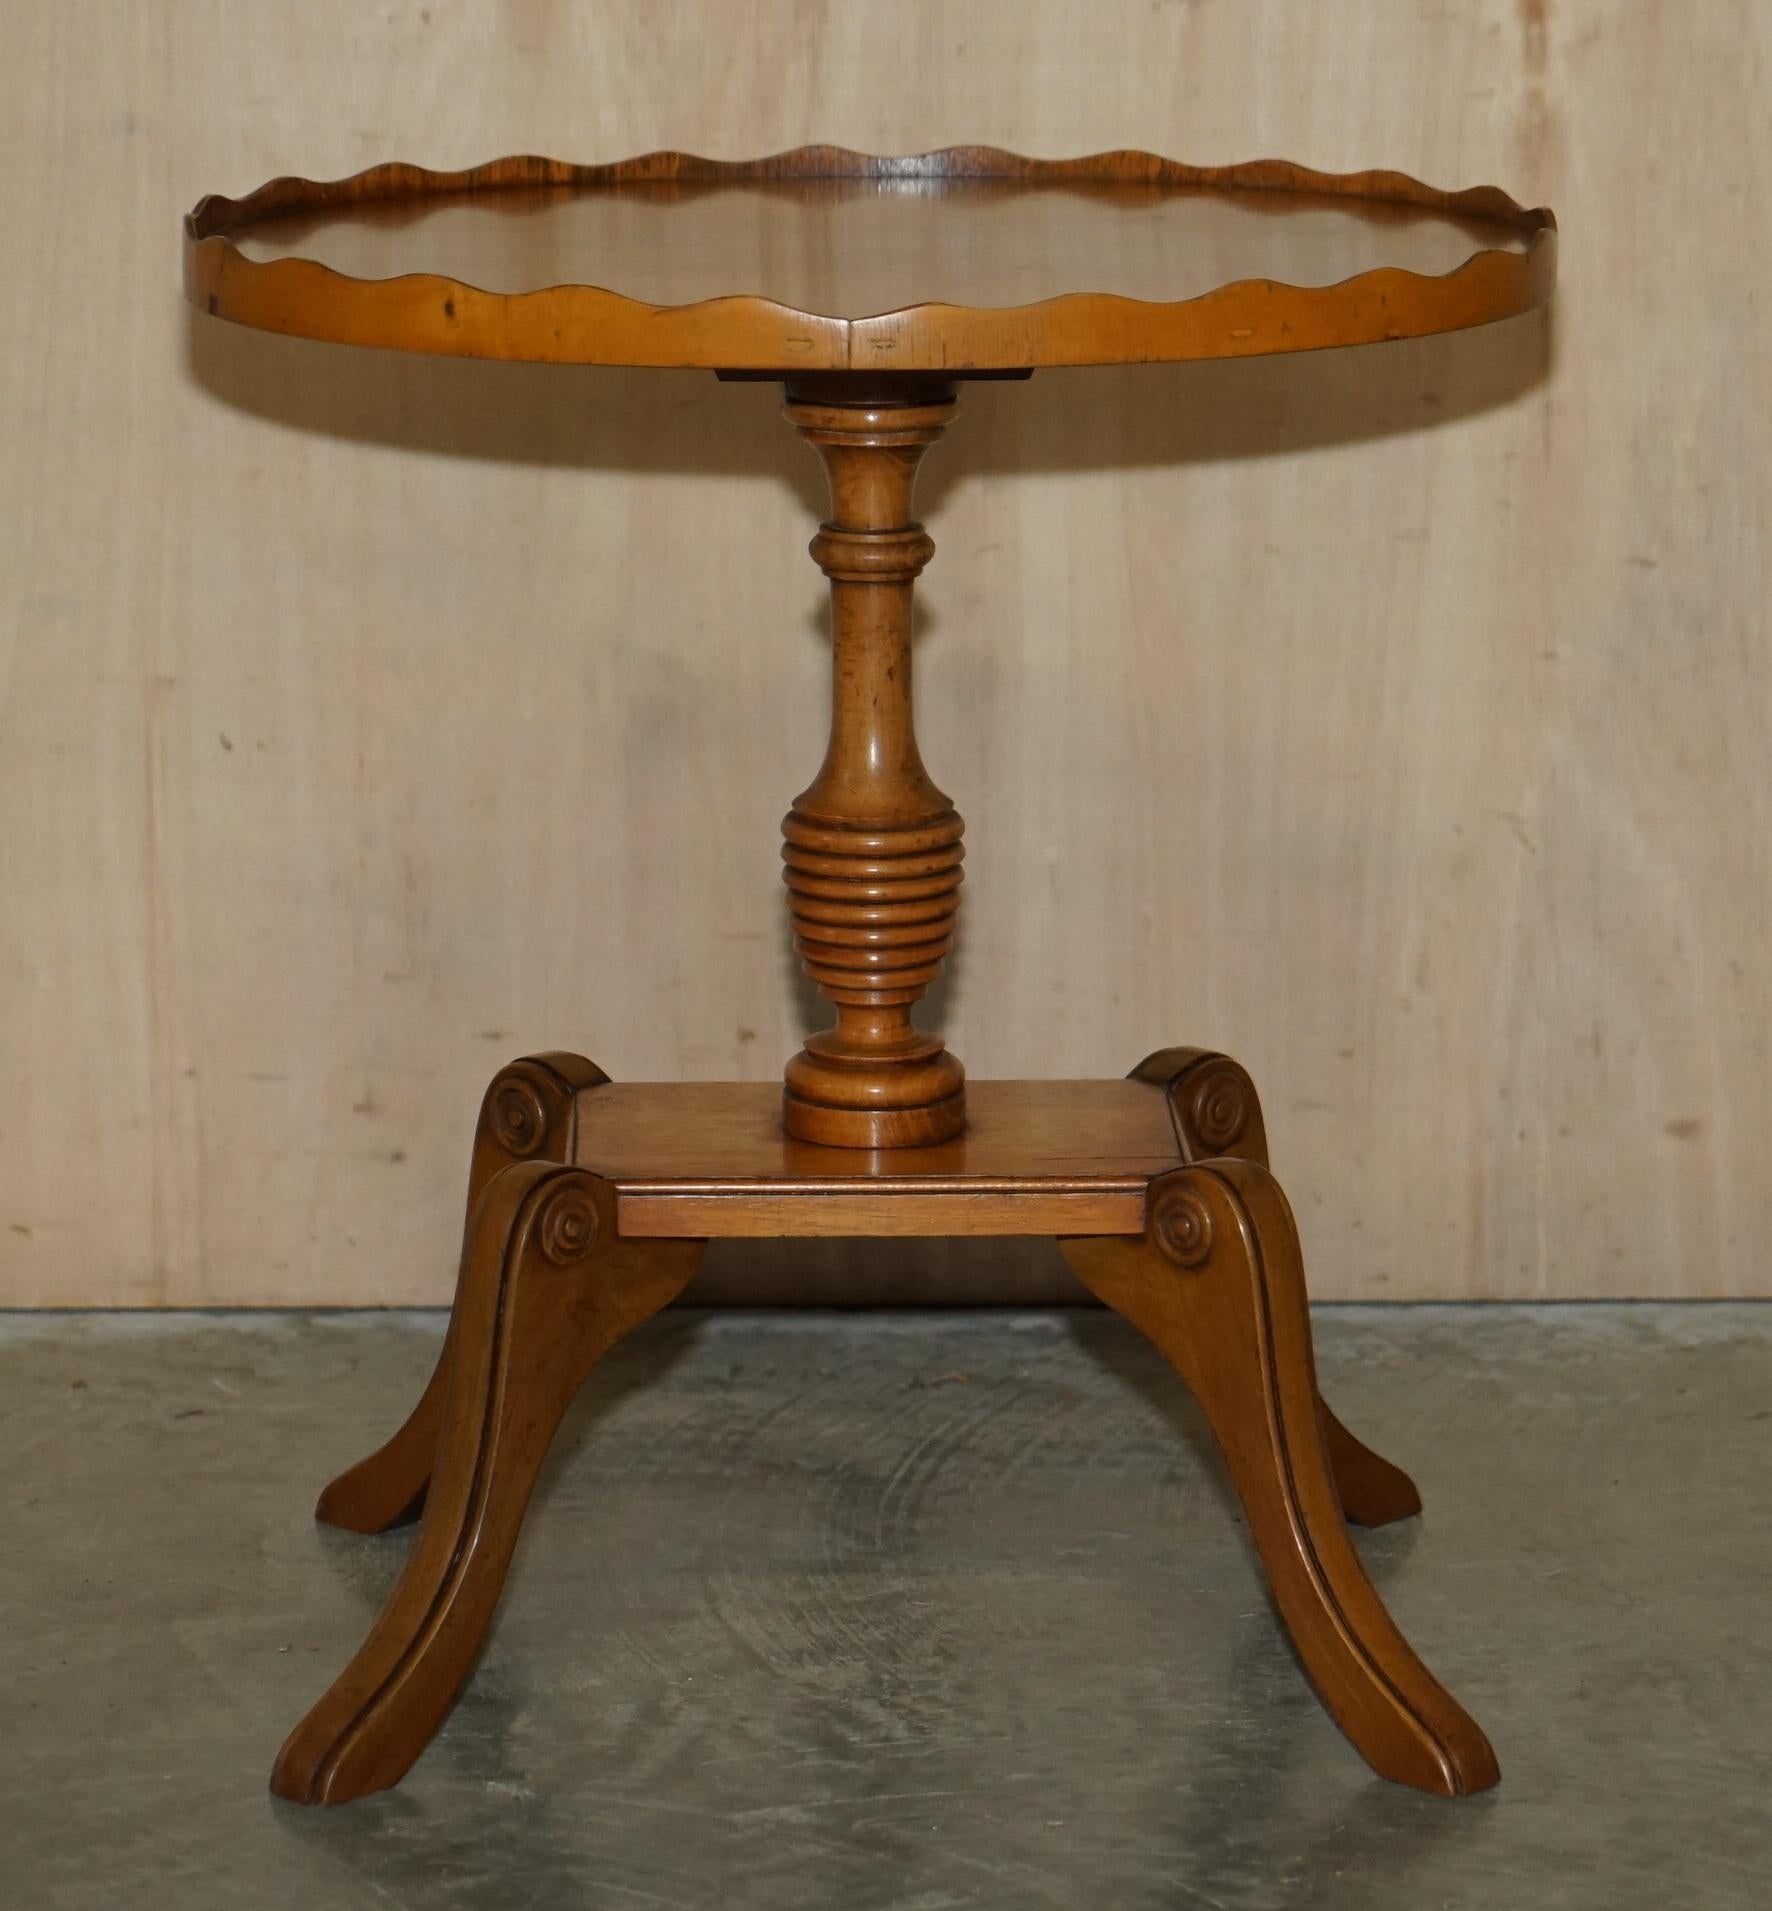 Pair of Burr Yew Wood Beresford & Hicks Side End Lamp Tables with Gallery Rail For Sale 10